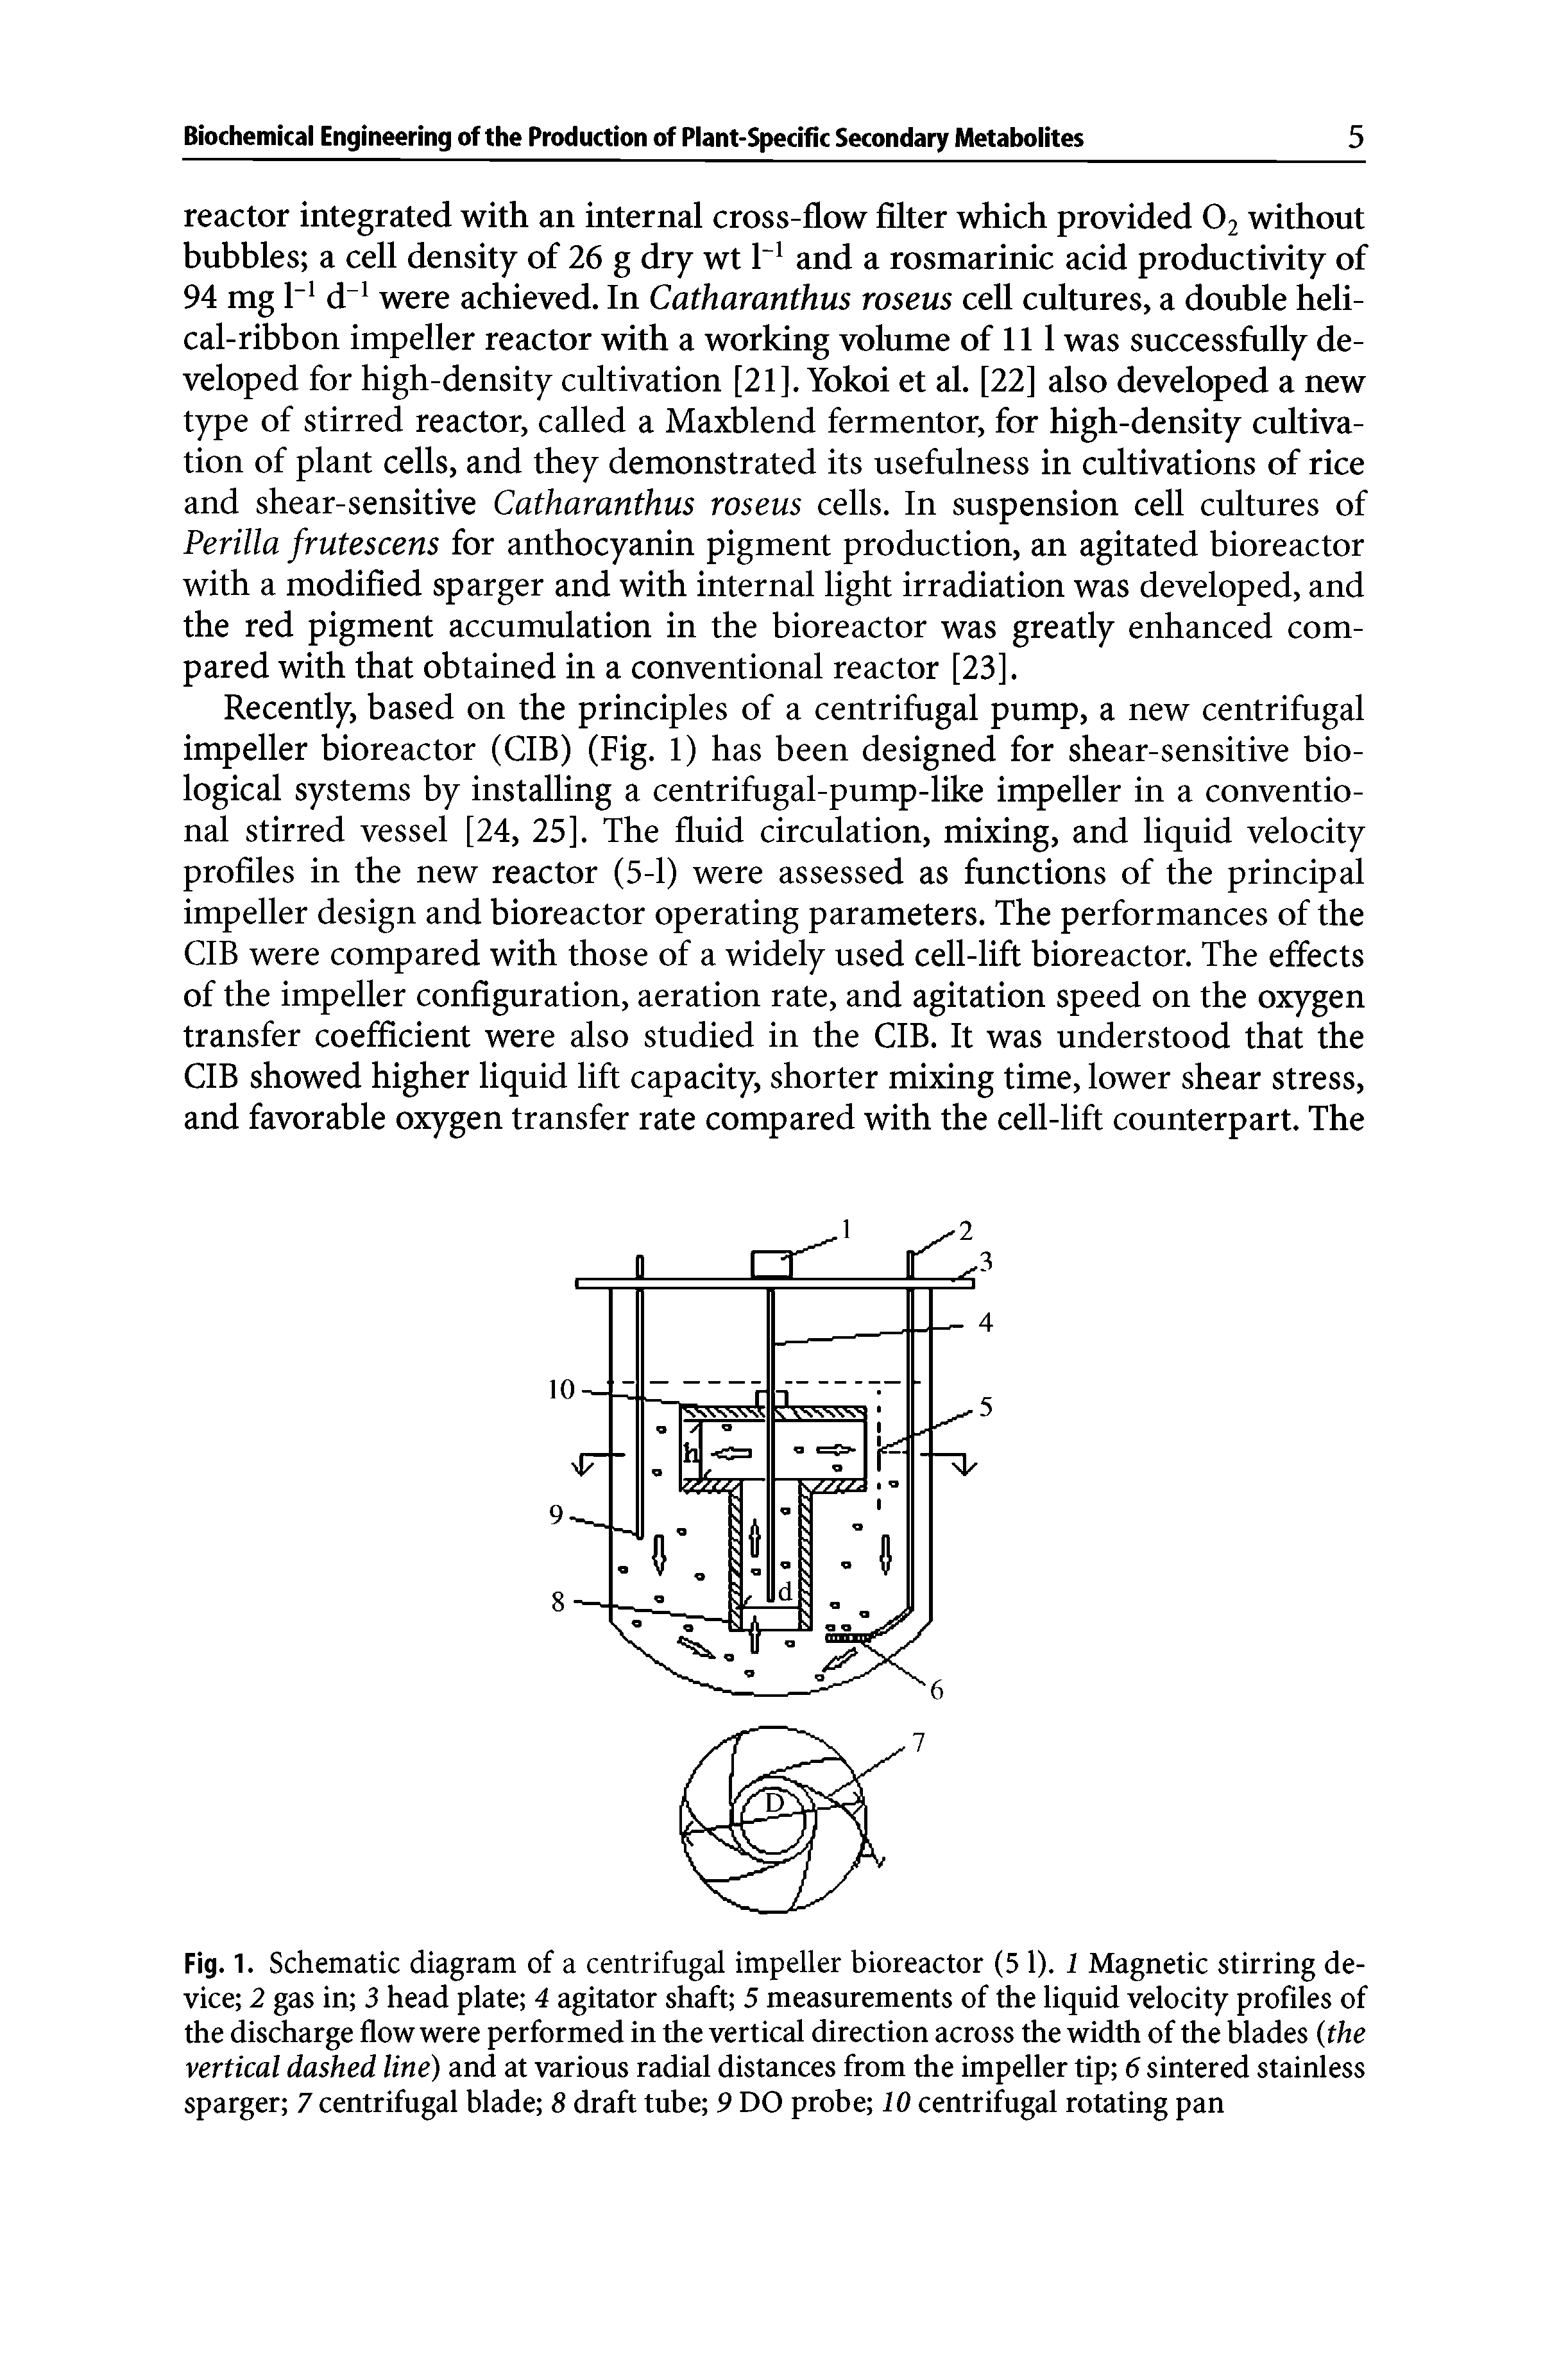 Fig. 1. Schematic diagram of a centrifugal impeller bioreactor (5 1). 1 Magnetic stirring device 2 gas in 3 head plate 4 agitator shaft 5 measurements of the liquid velocity profiles of the discharge flow were performed in the vertical direction across the width of the blades (the vertical dashed line) and at various radial distances from the impeller tip 6 sintered stainless sparger 7 centrifugal blade 8 draft tube 9 DO probe 10 centrifugal rotating pan...